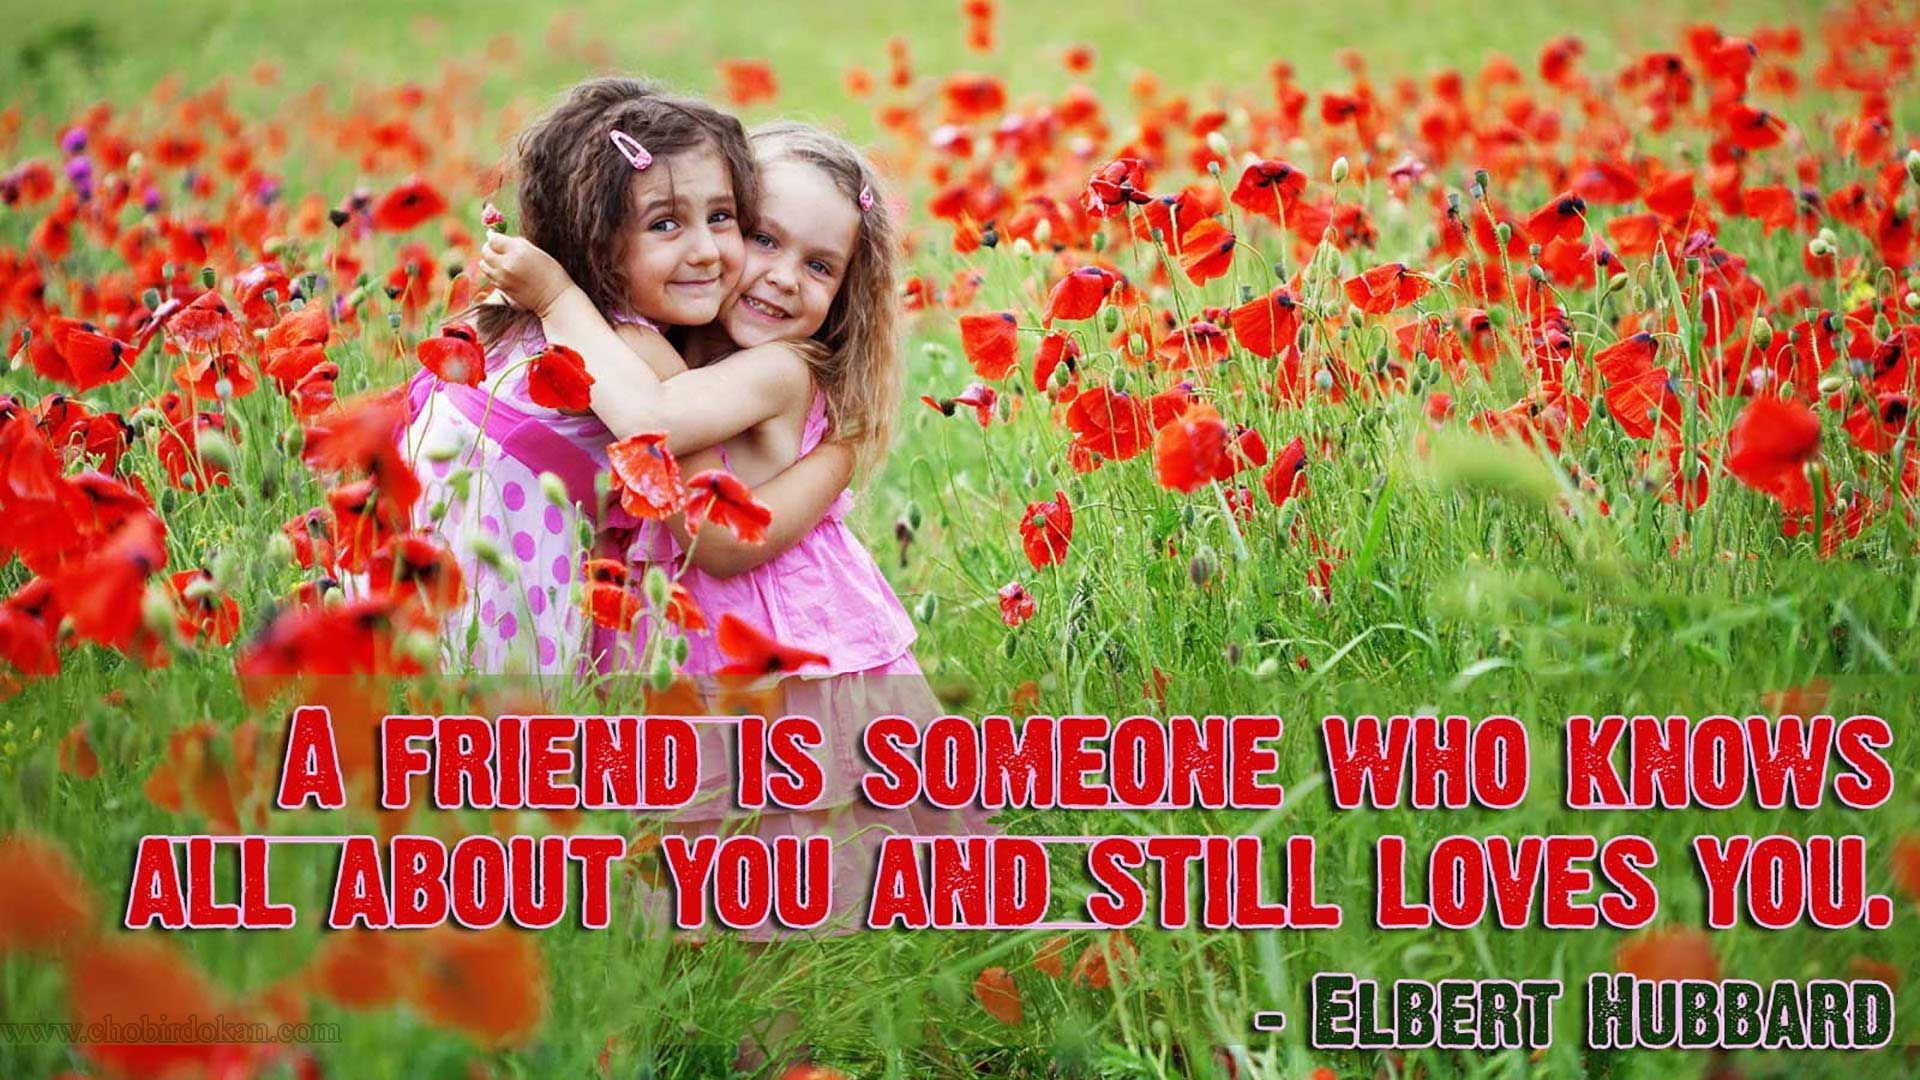 1920x1080 40+ Cute Friendship Quotes With Images | Friendship wallpapers